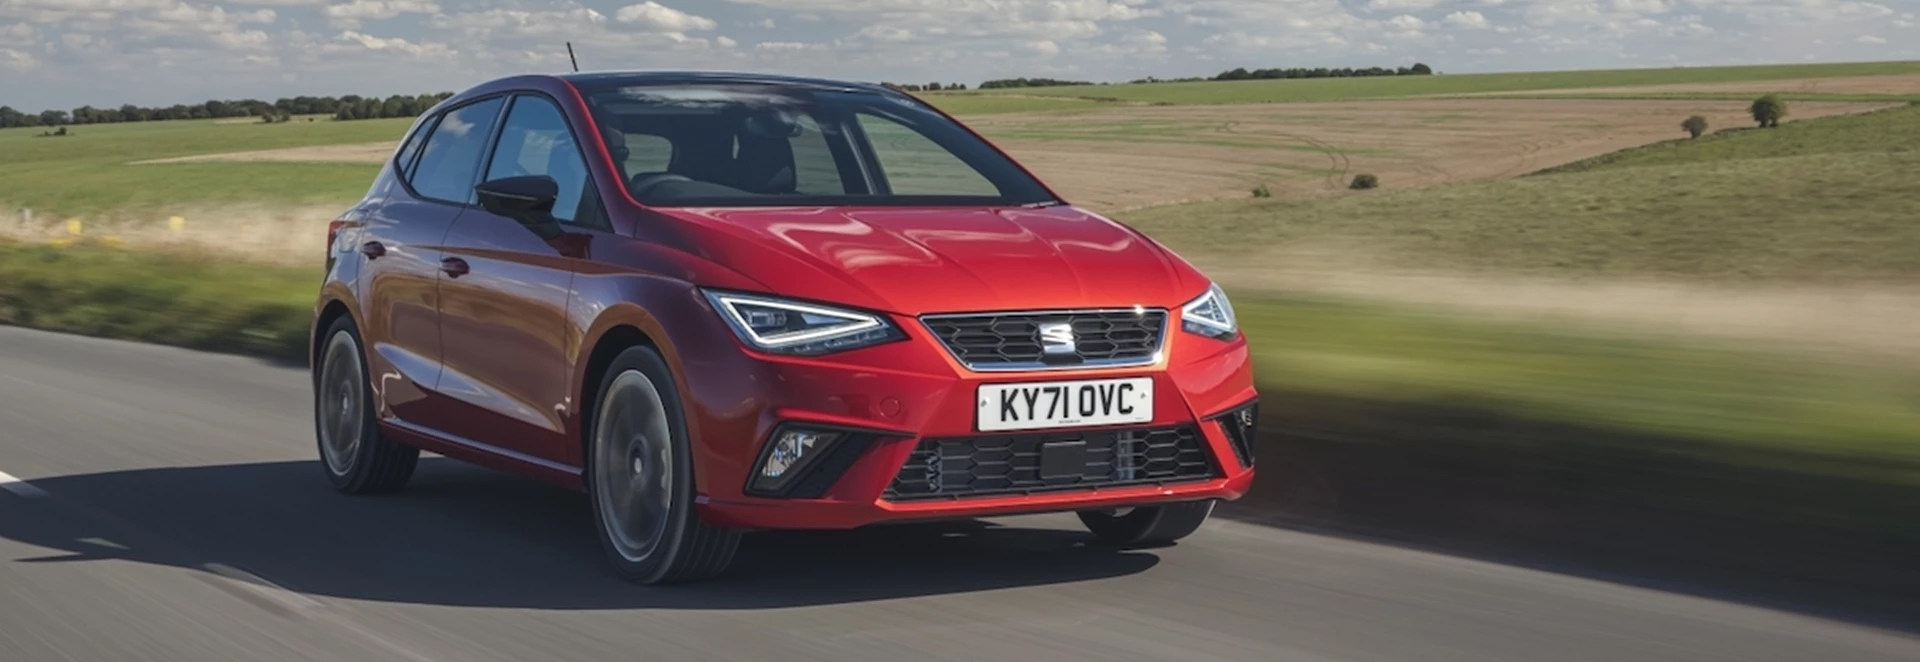 5 things you need to know about the Seat Ibiza 